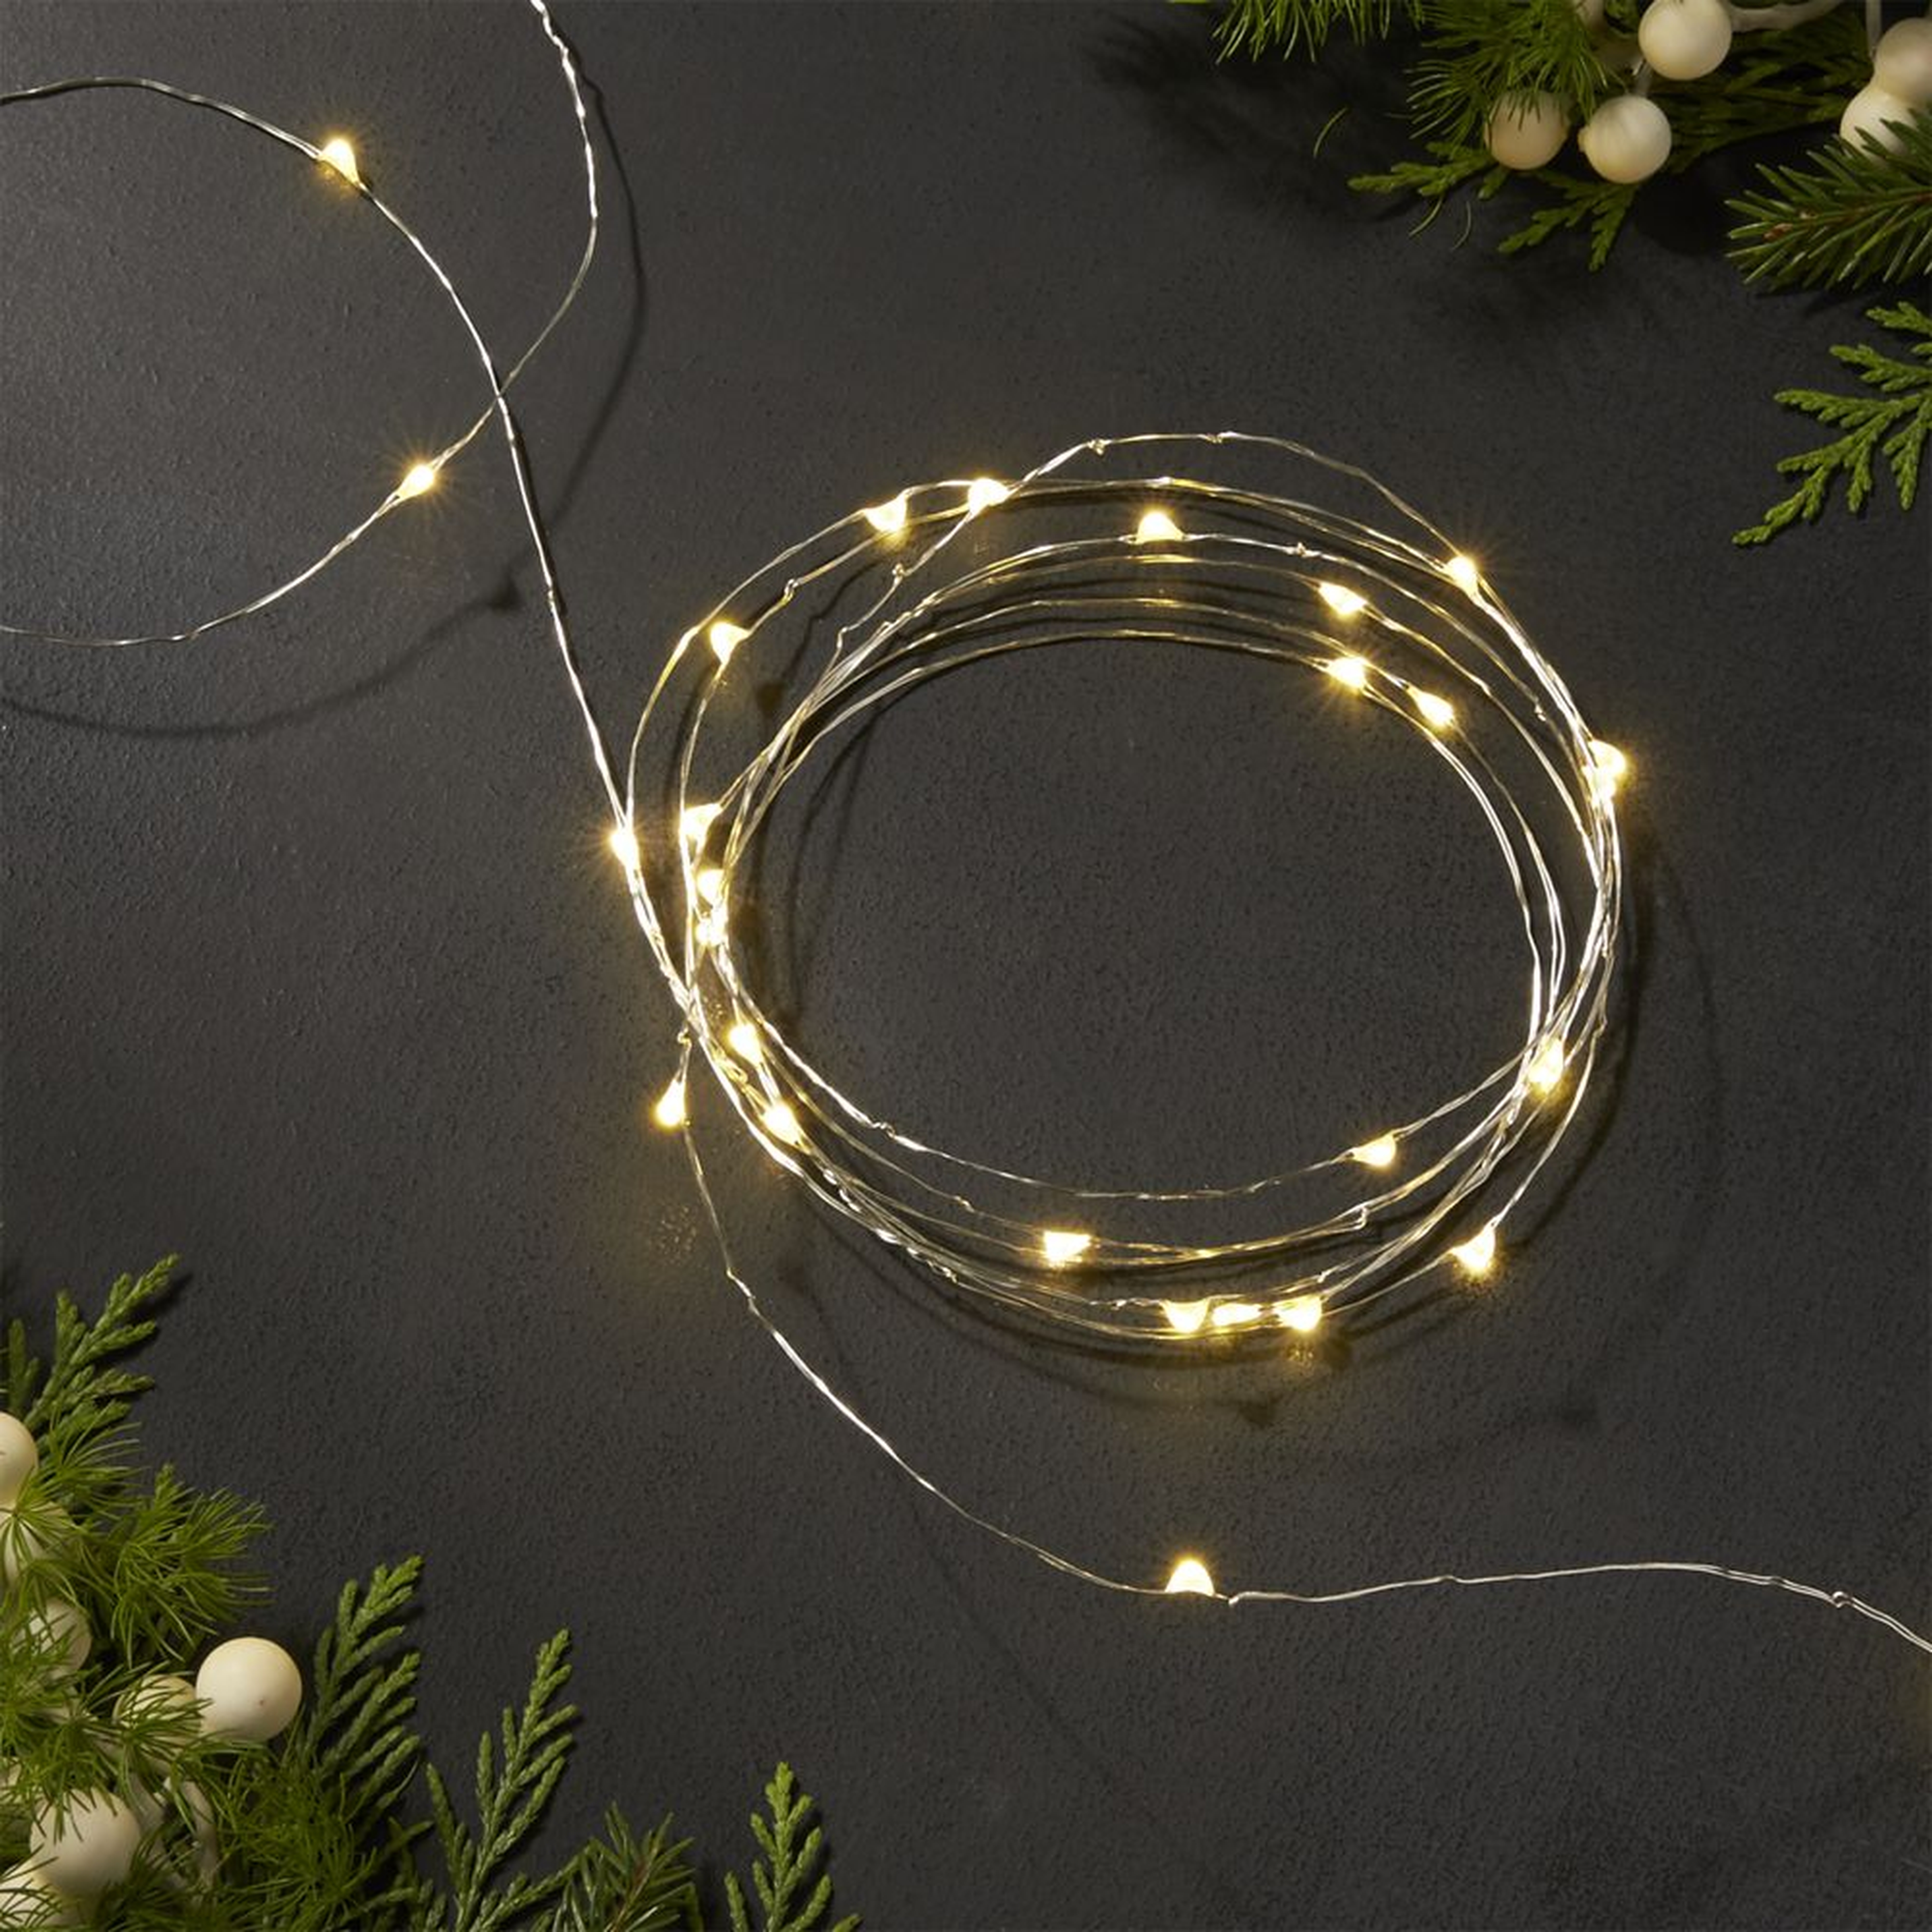 Twinkle Silver 10' Outdoor String Lights - Crate and Barrel